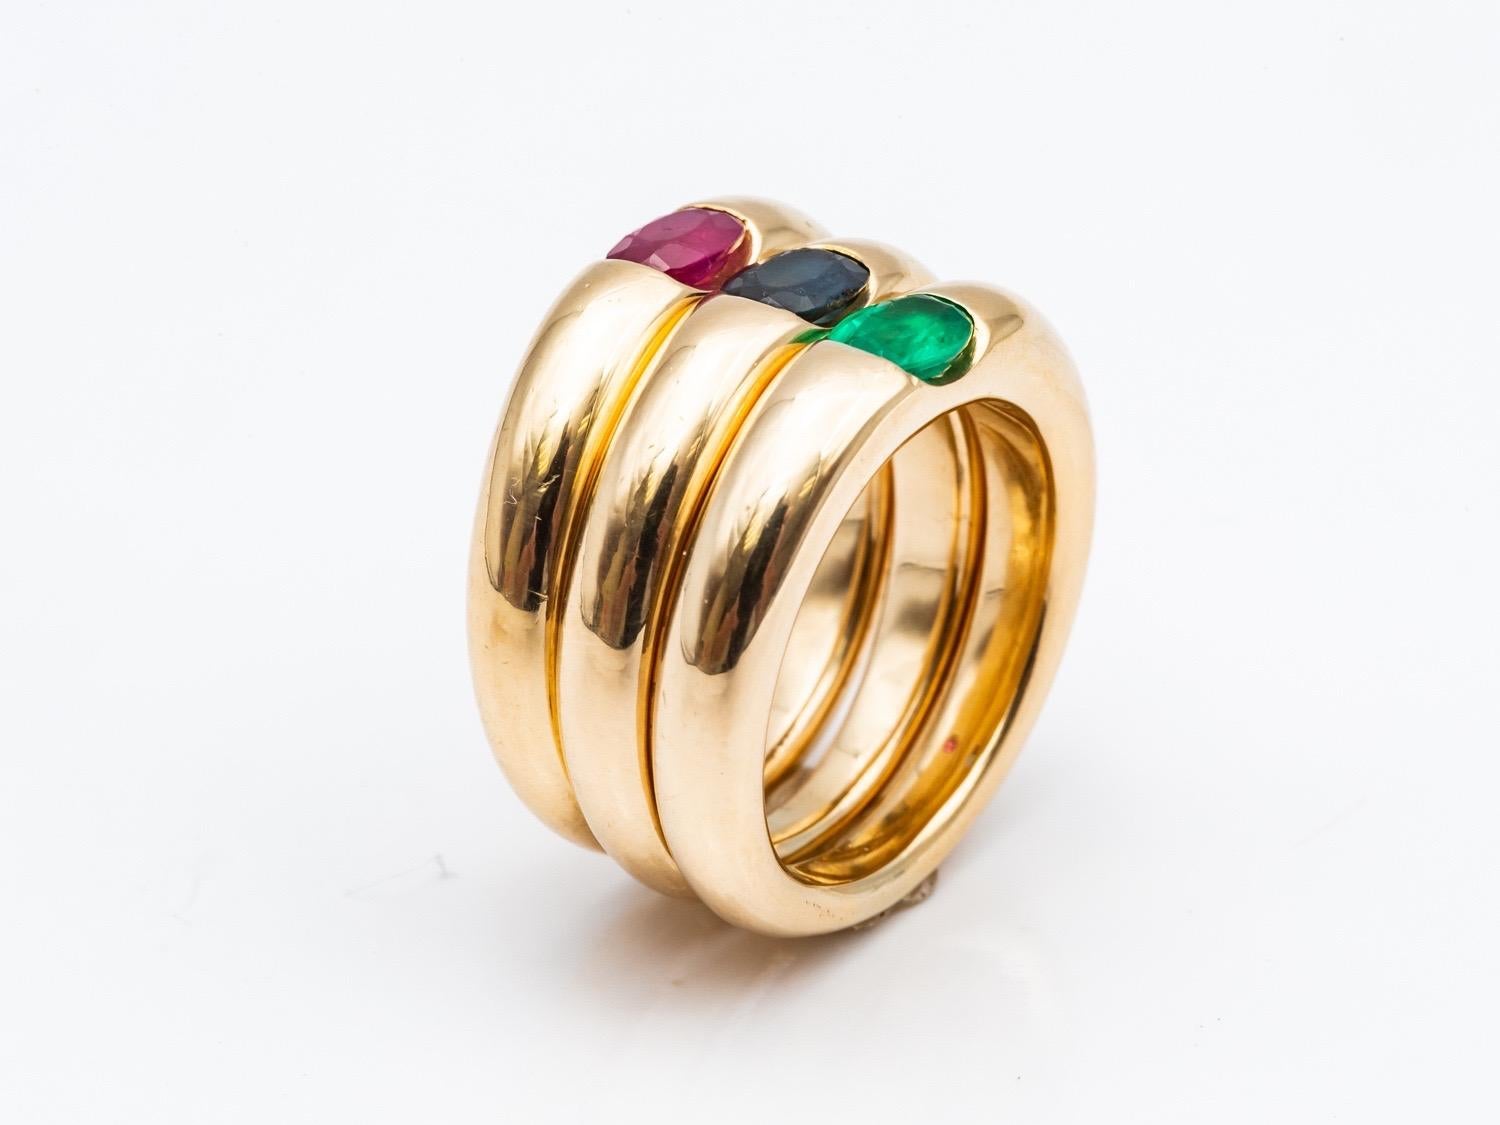 Three 18 Karat Gold Bangles Rings Set with an Emerald, a Sapphire, and a Ruby 7